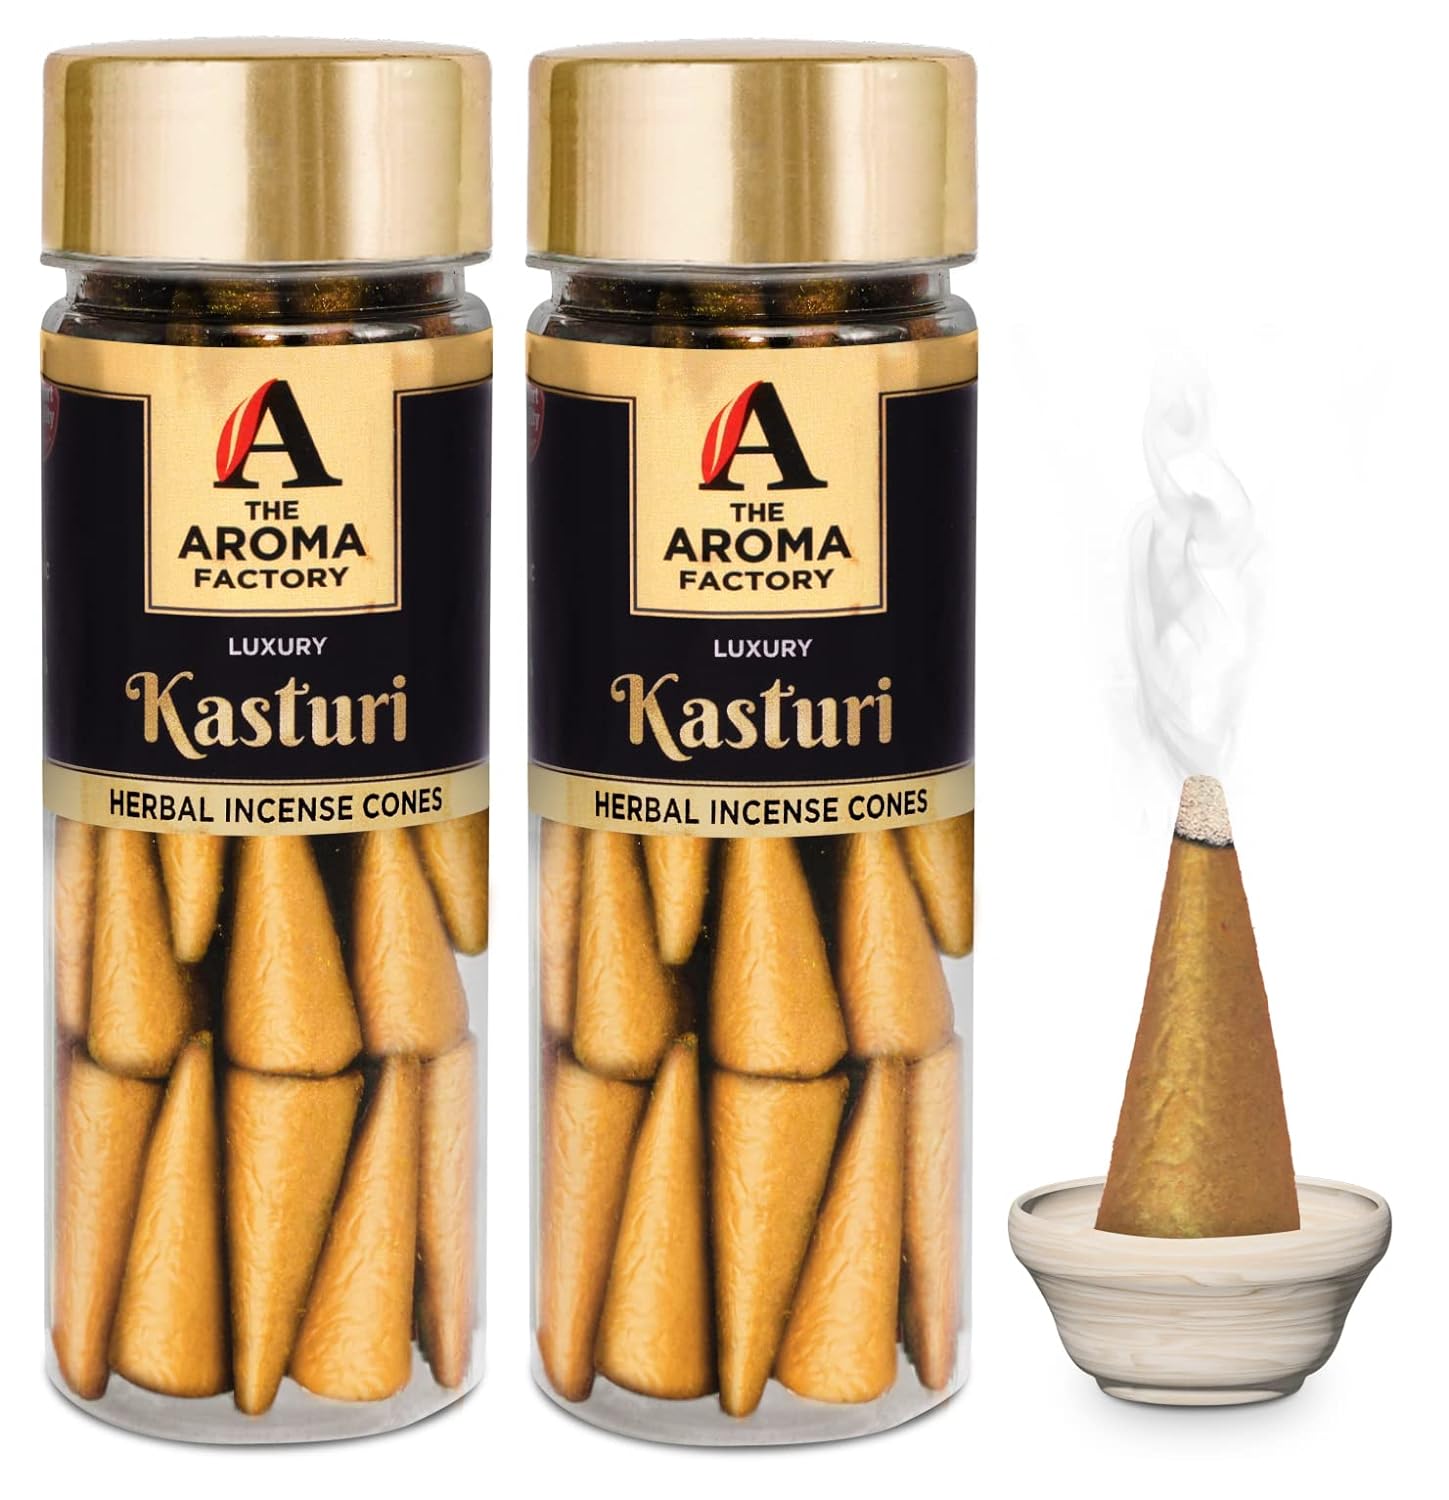 The Aroma Factory Incense Dhoop Cone for Puja, Kasturi (100% Herbal & 0% Charcoal) 2 Bottles x 30 Cones